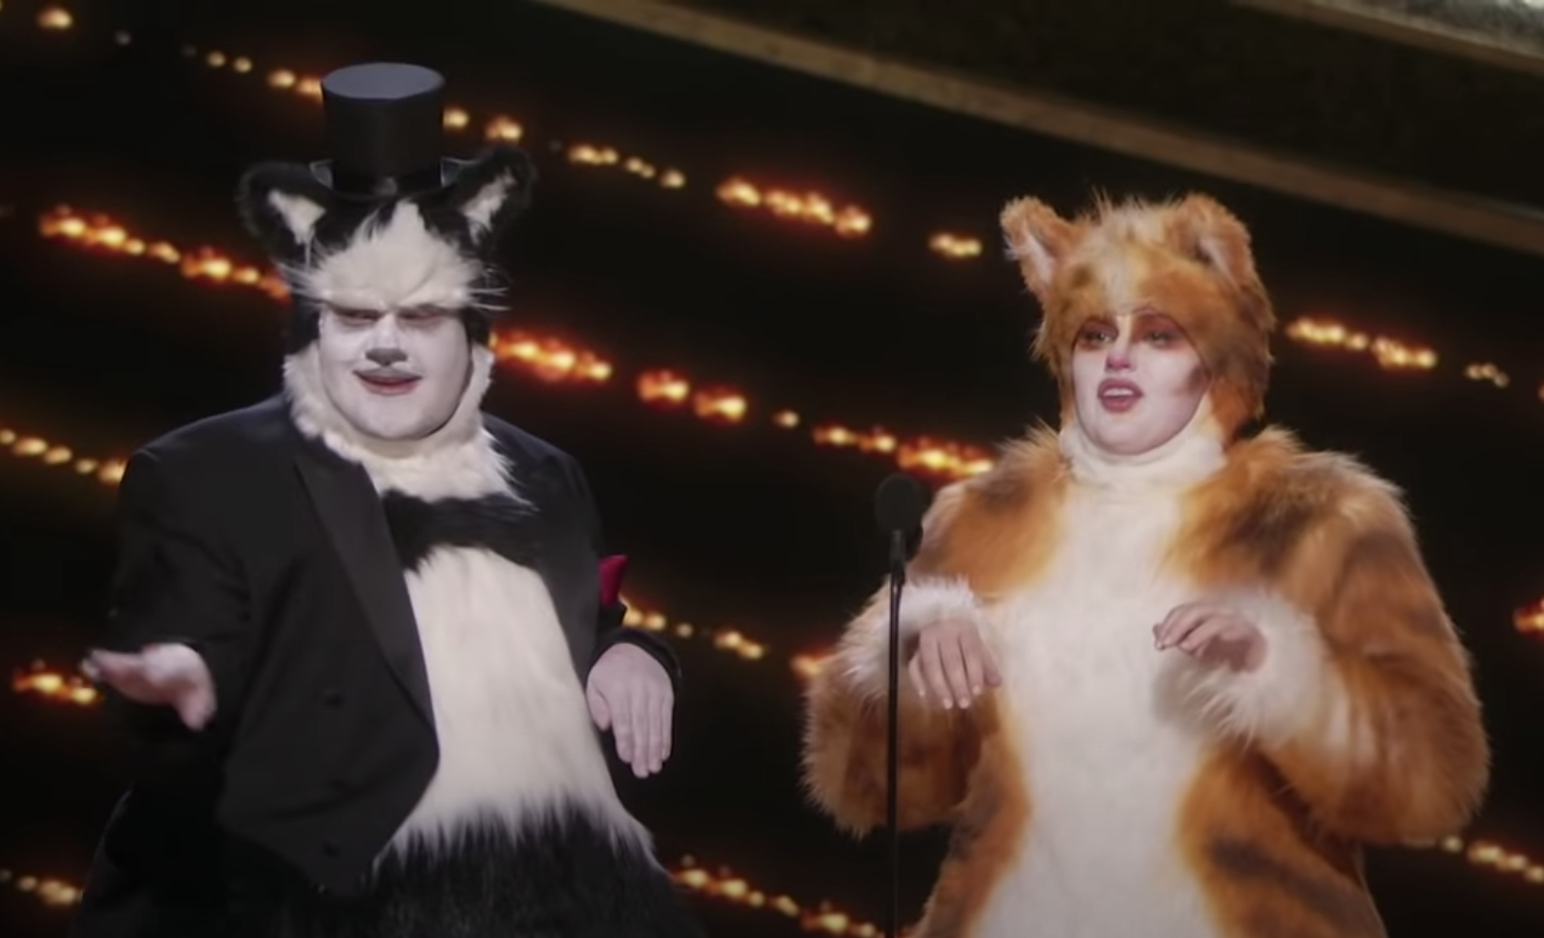 Rebel and James dress up as humanoid cats, complete with face makeup